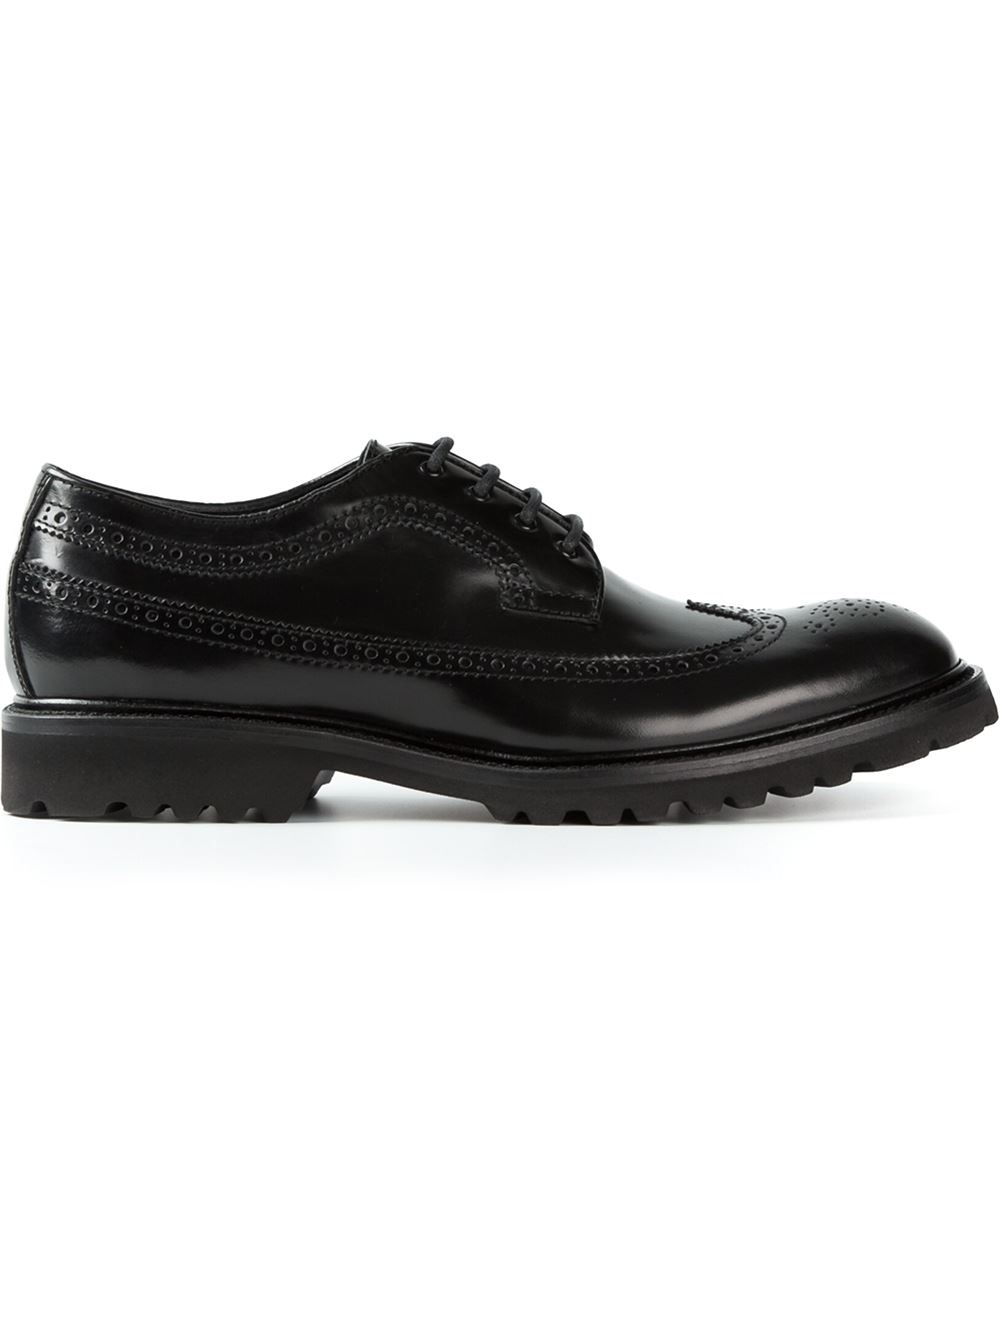 DSquared² Chunky Brogues in Black for Men - Lyst